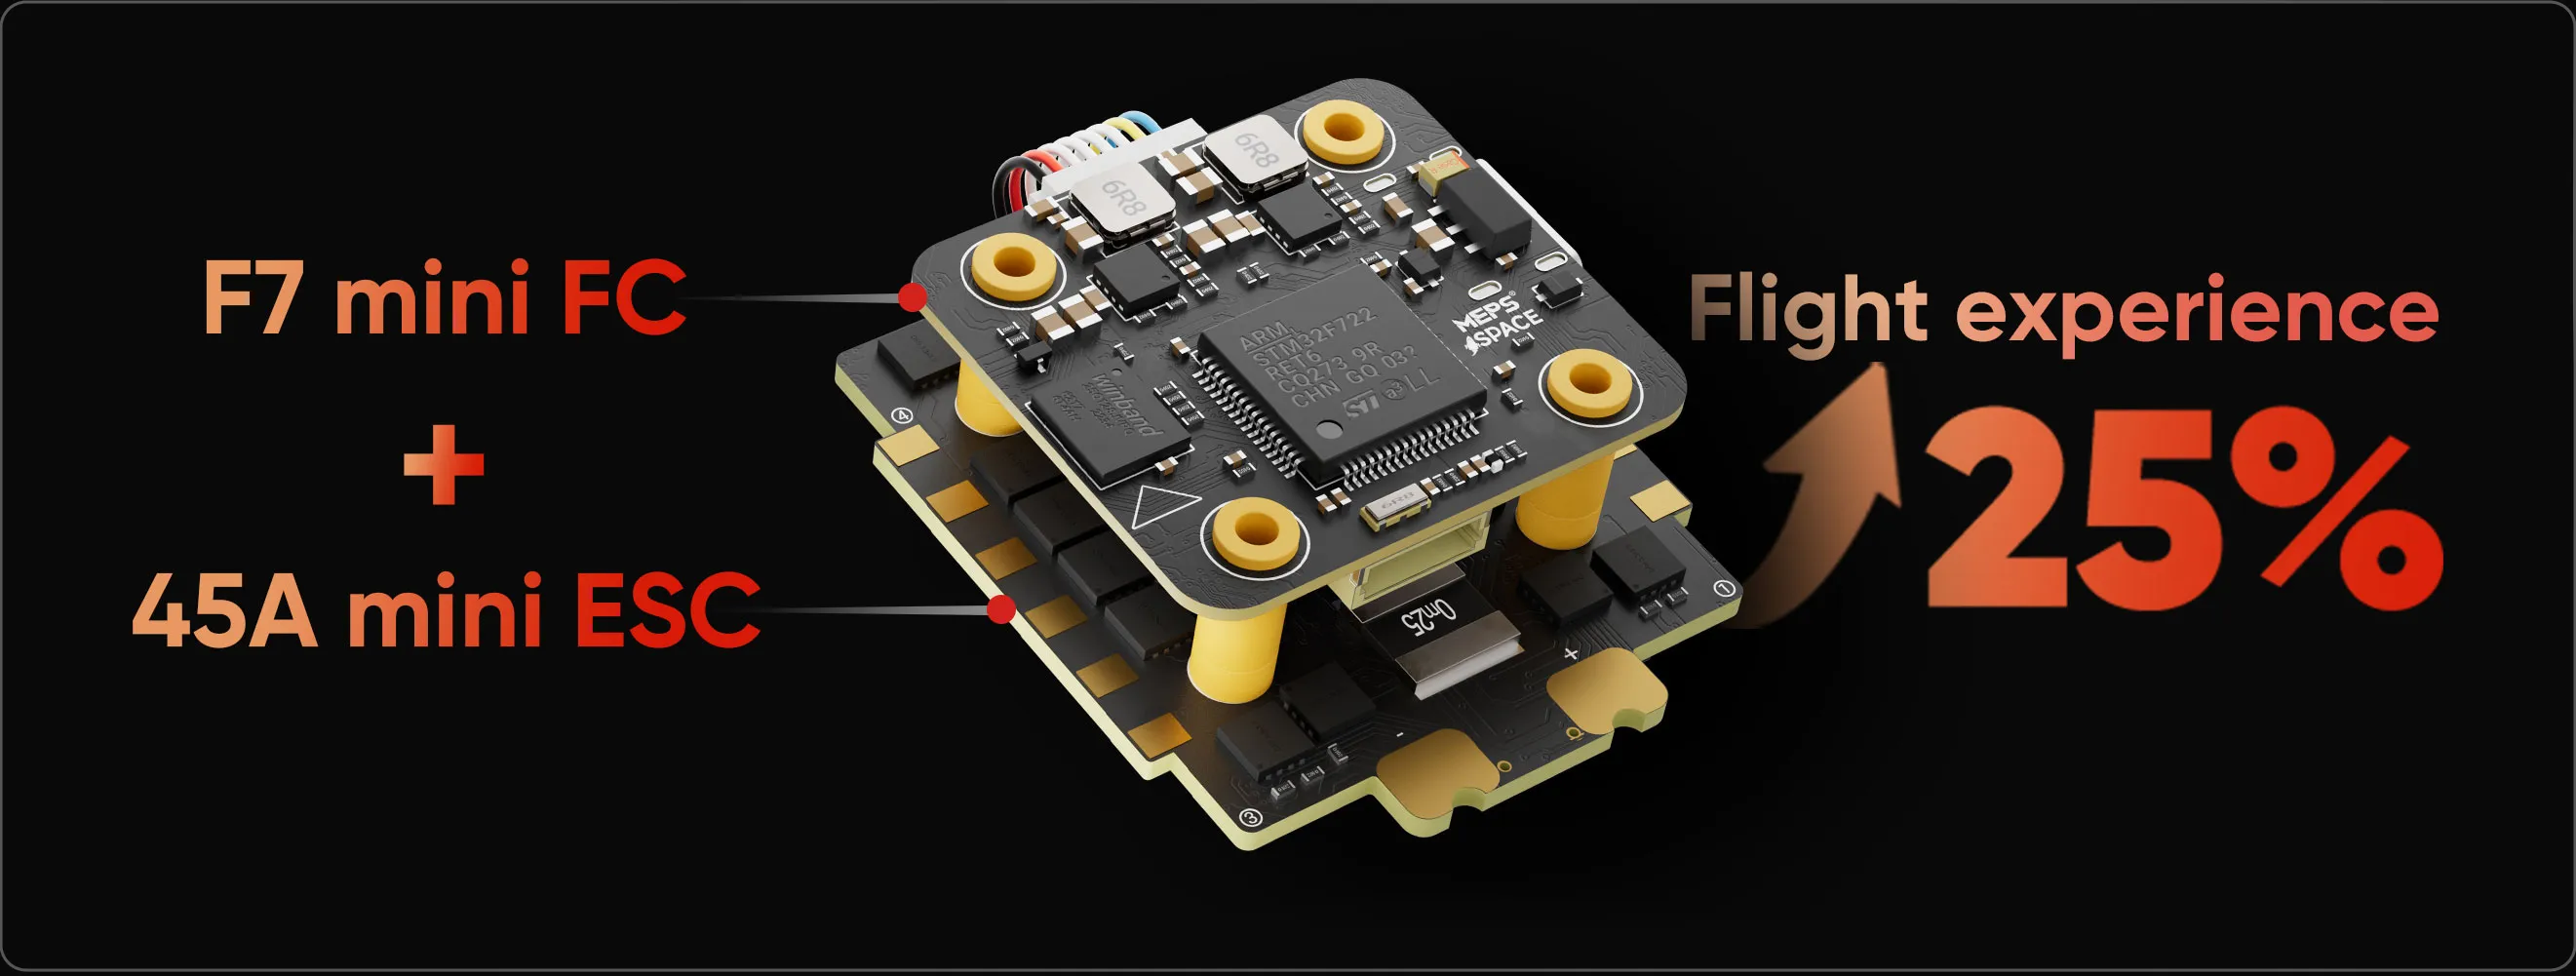 MEPS MINI F7 HD ANALOG flight controller delivers optimal performance